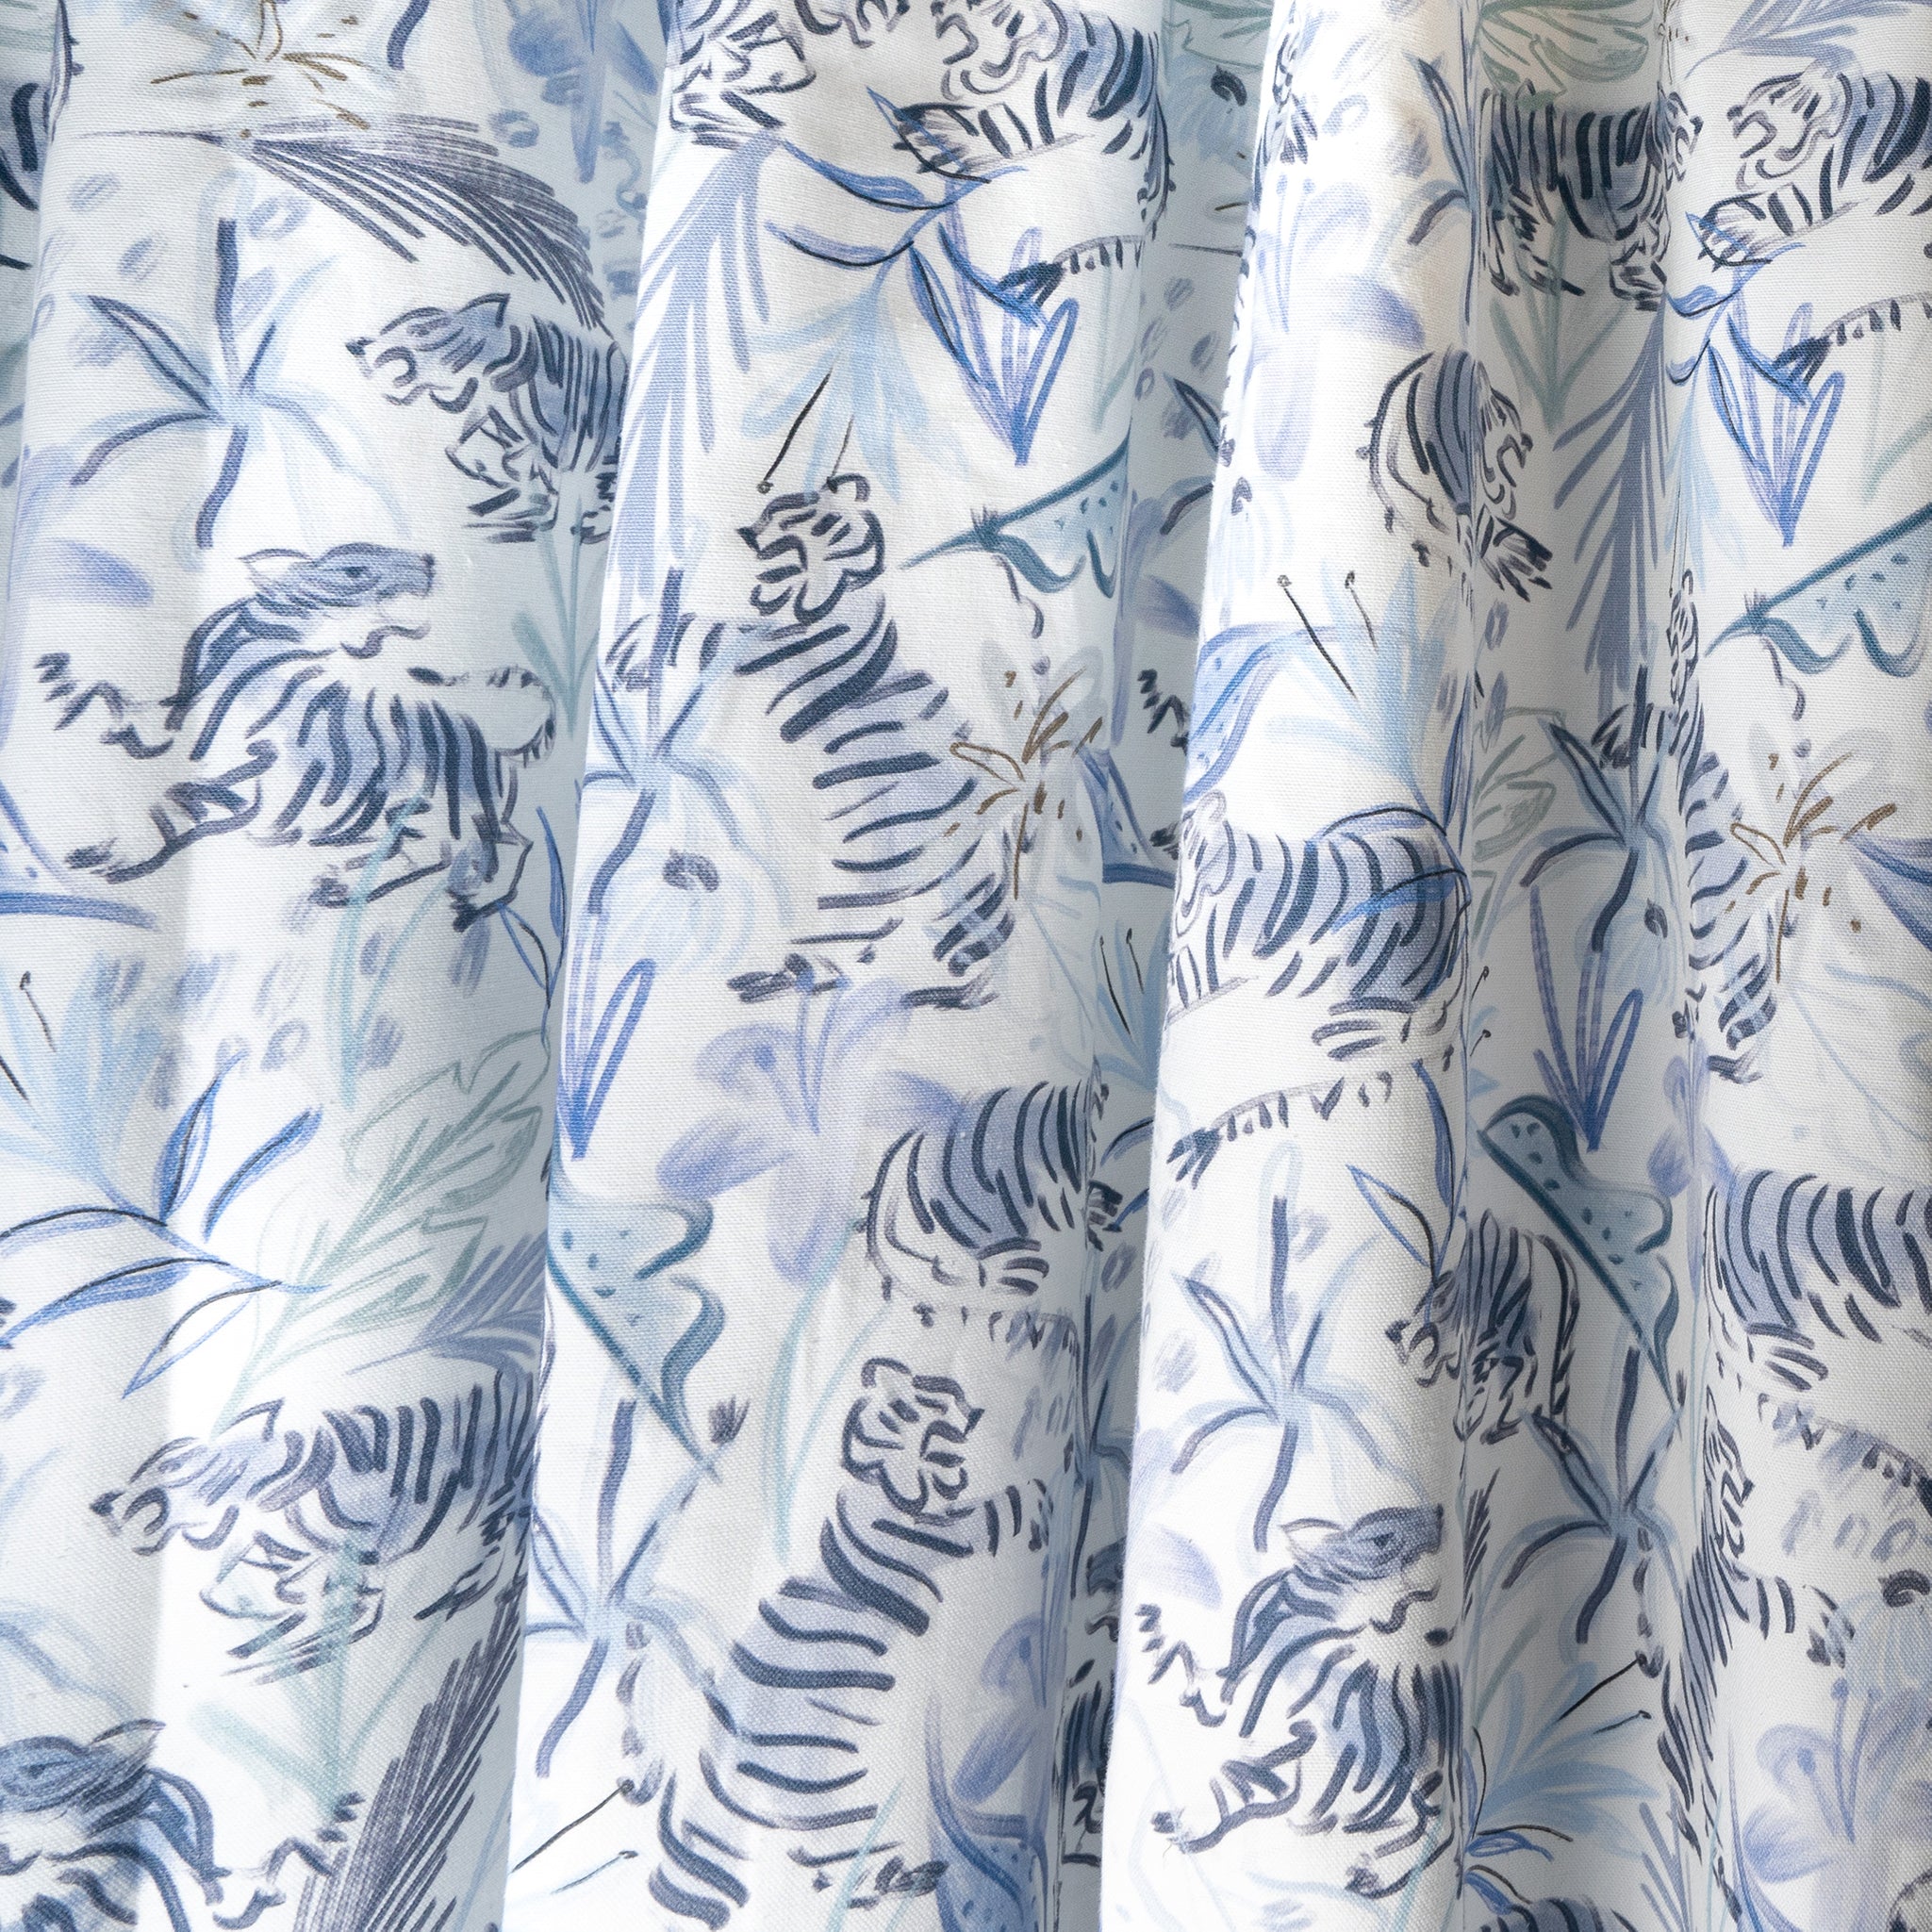 Blue With Intricate Tiger Design Printed Curtain Close-Up